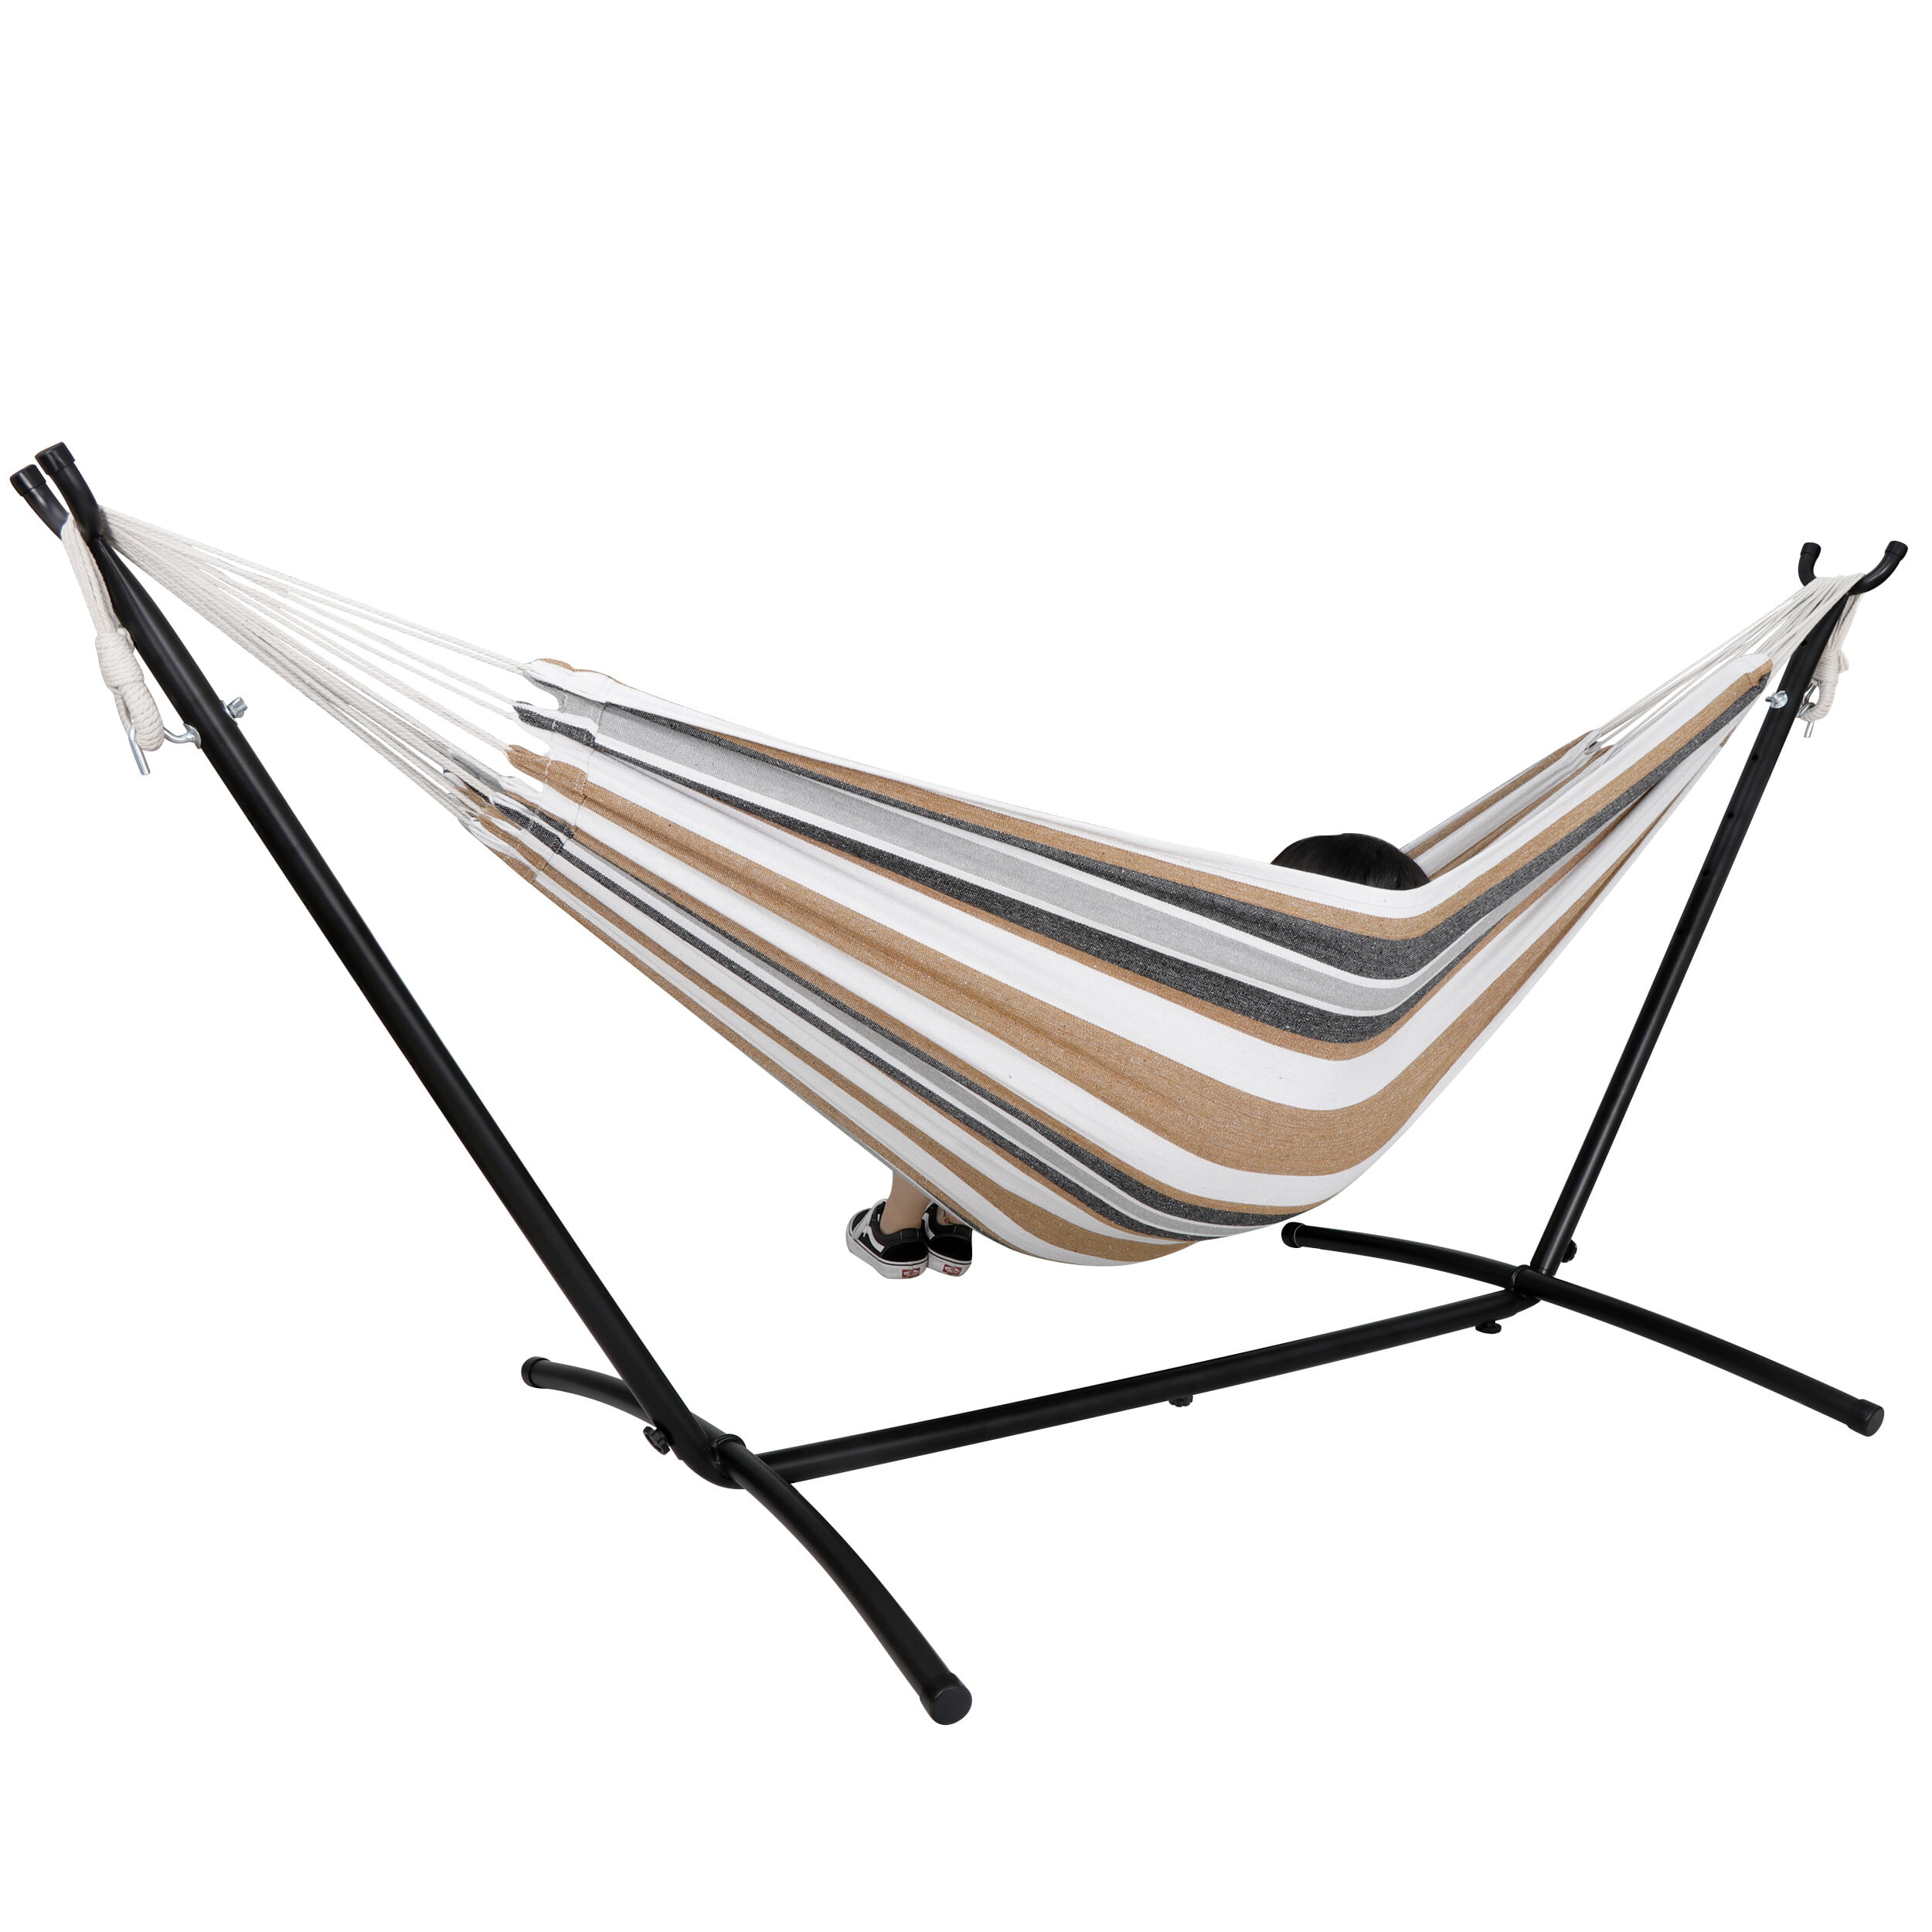 Details about   9 FT Portable Heavy-Duty Steel Hammock Stand and Hammock w/Carrying Case Summer 